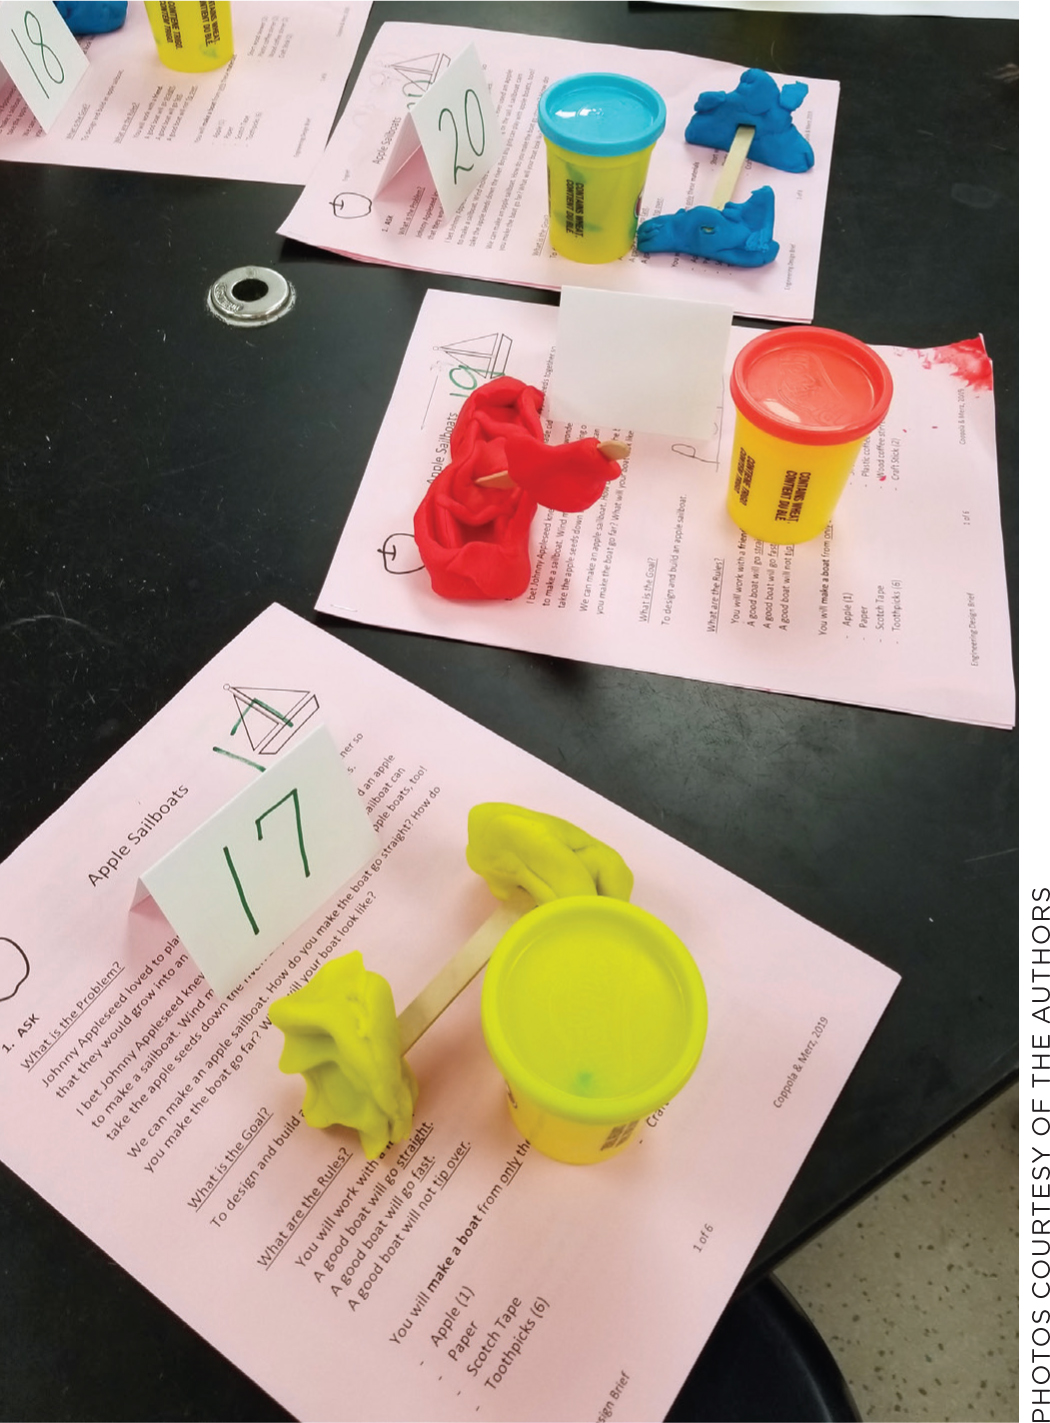 Working with play dough first allows students to create multiple designs.